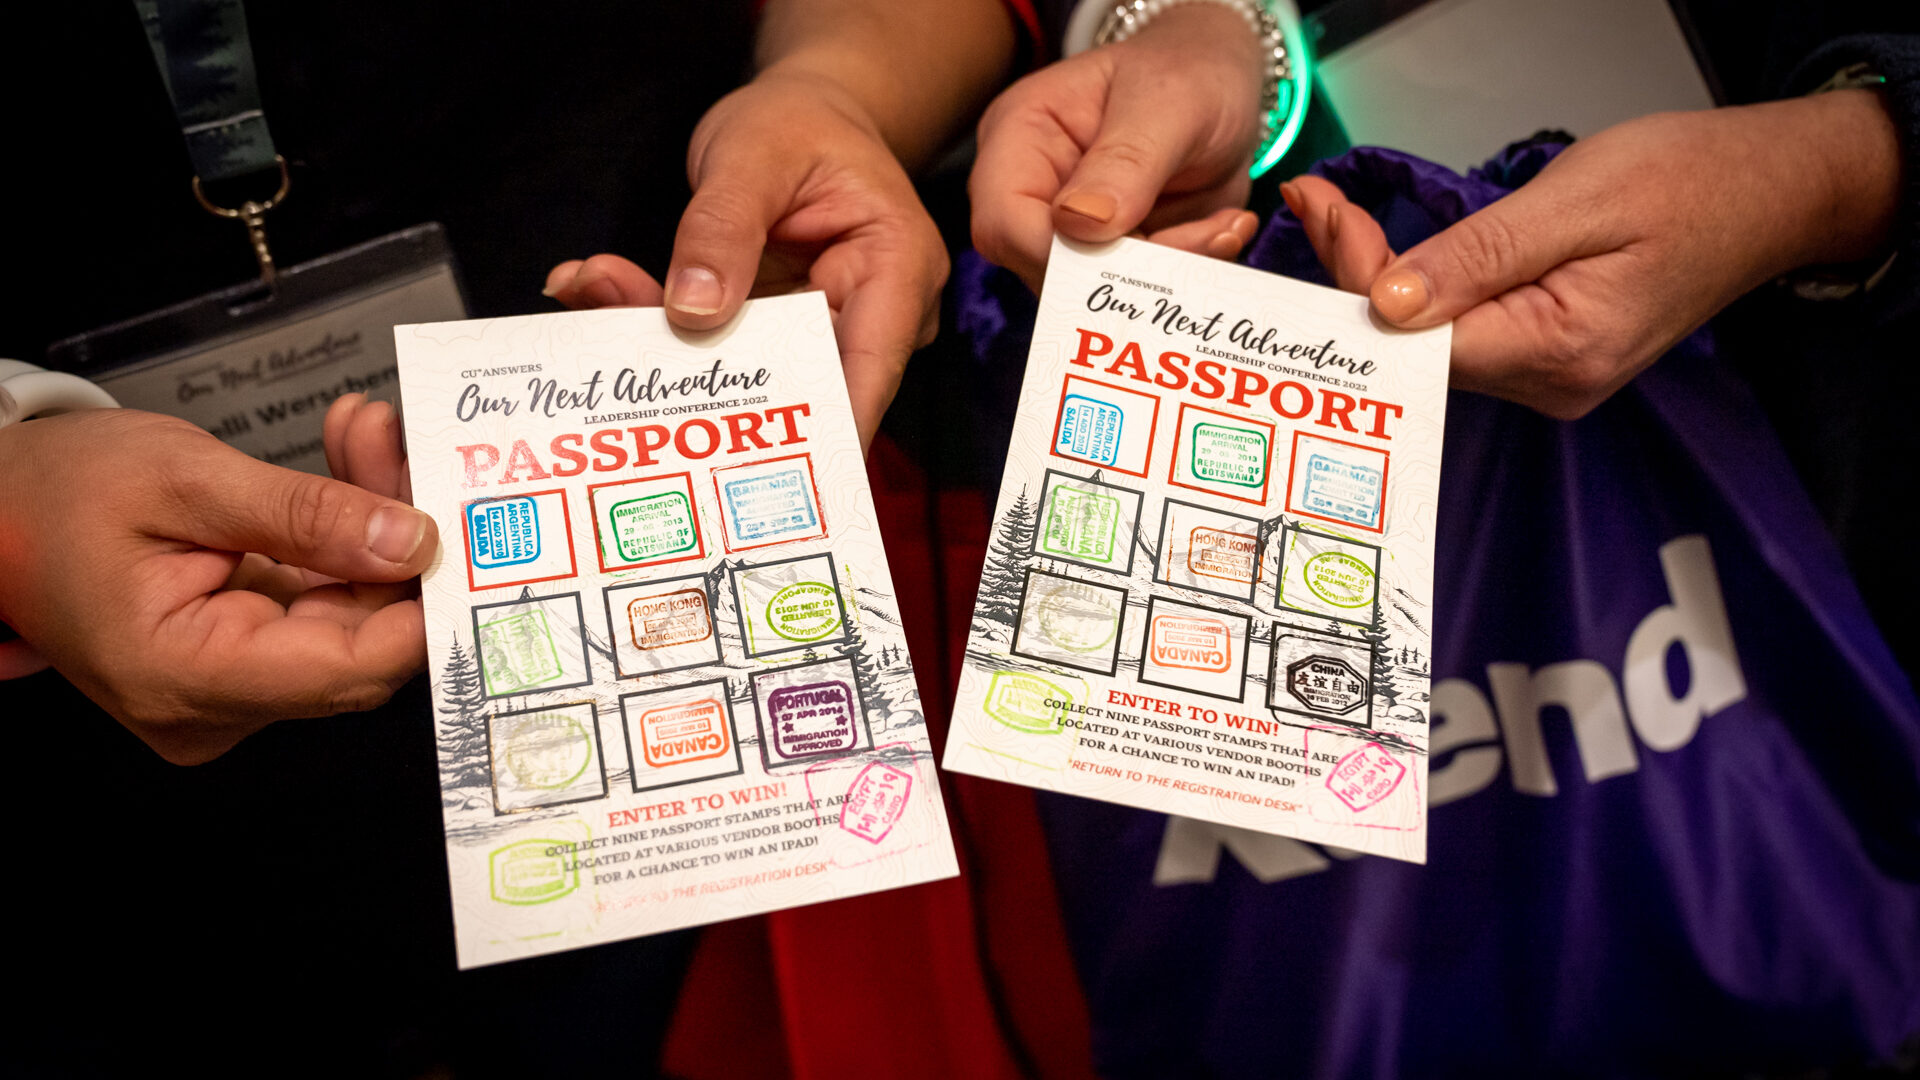 Attendees had their "passports" stamped to be entered to win an iPad.